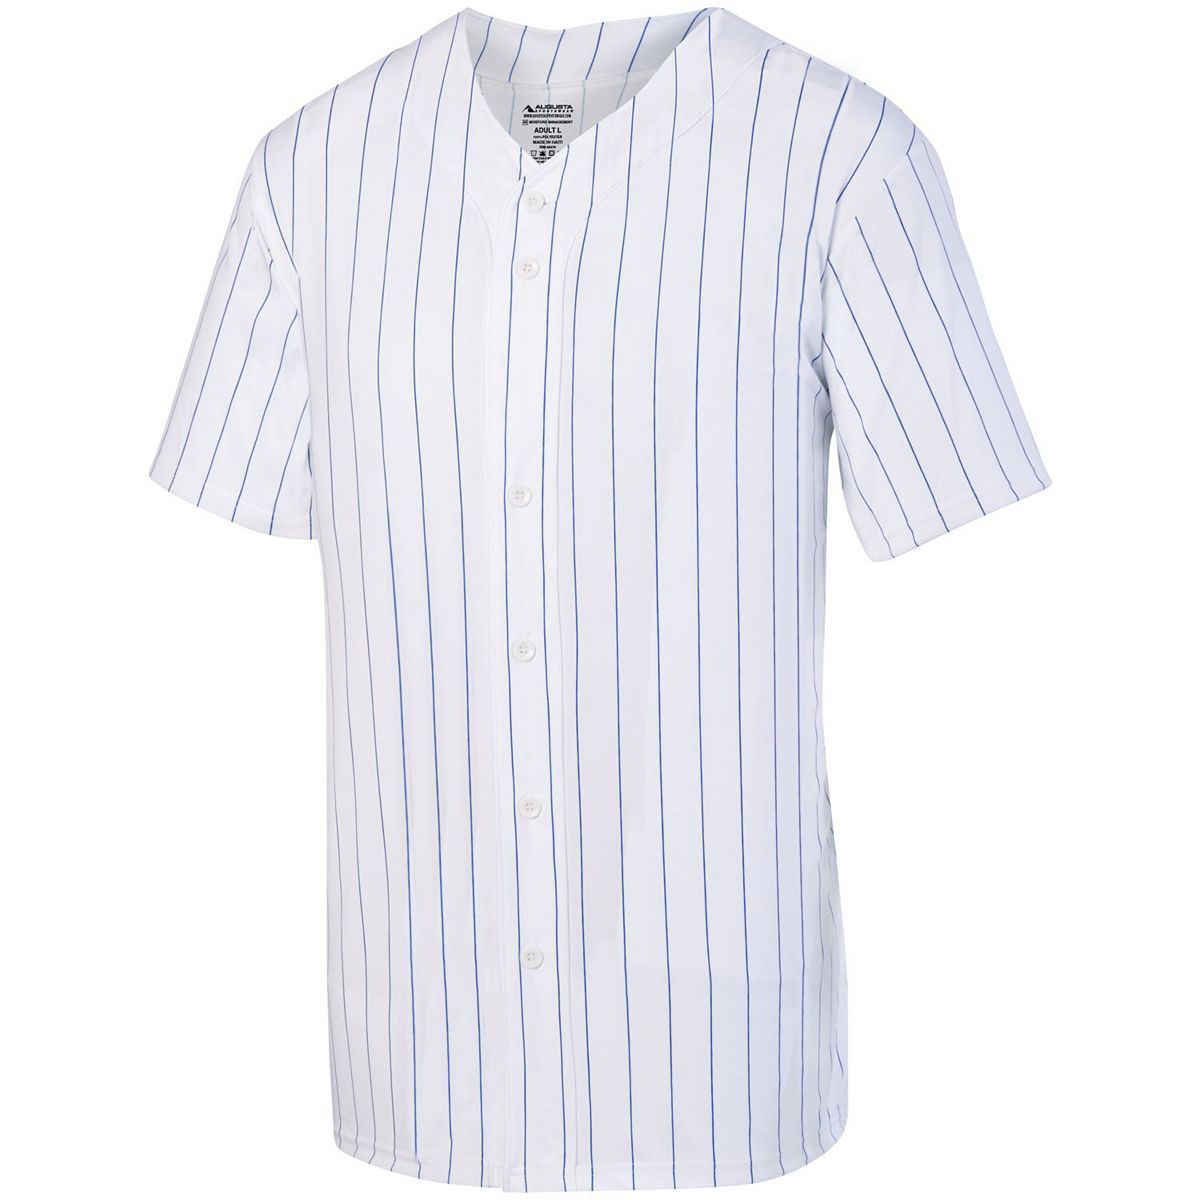 Youth Pinstripe Full-Button Jersey - 1686